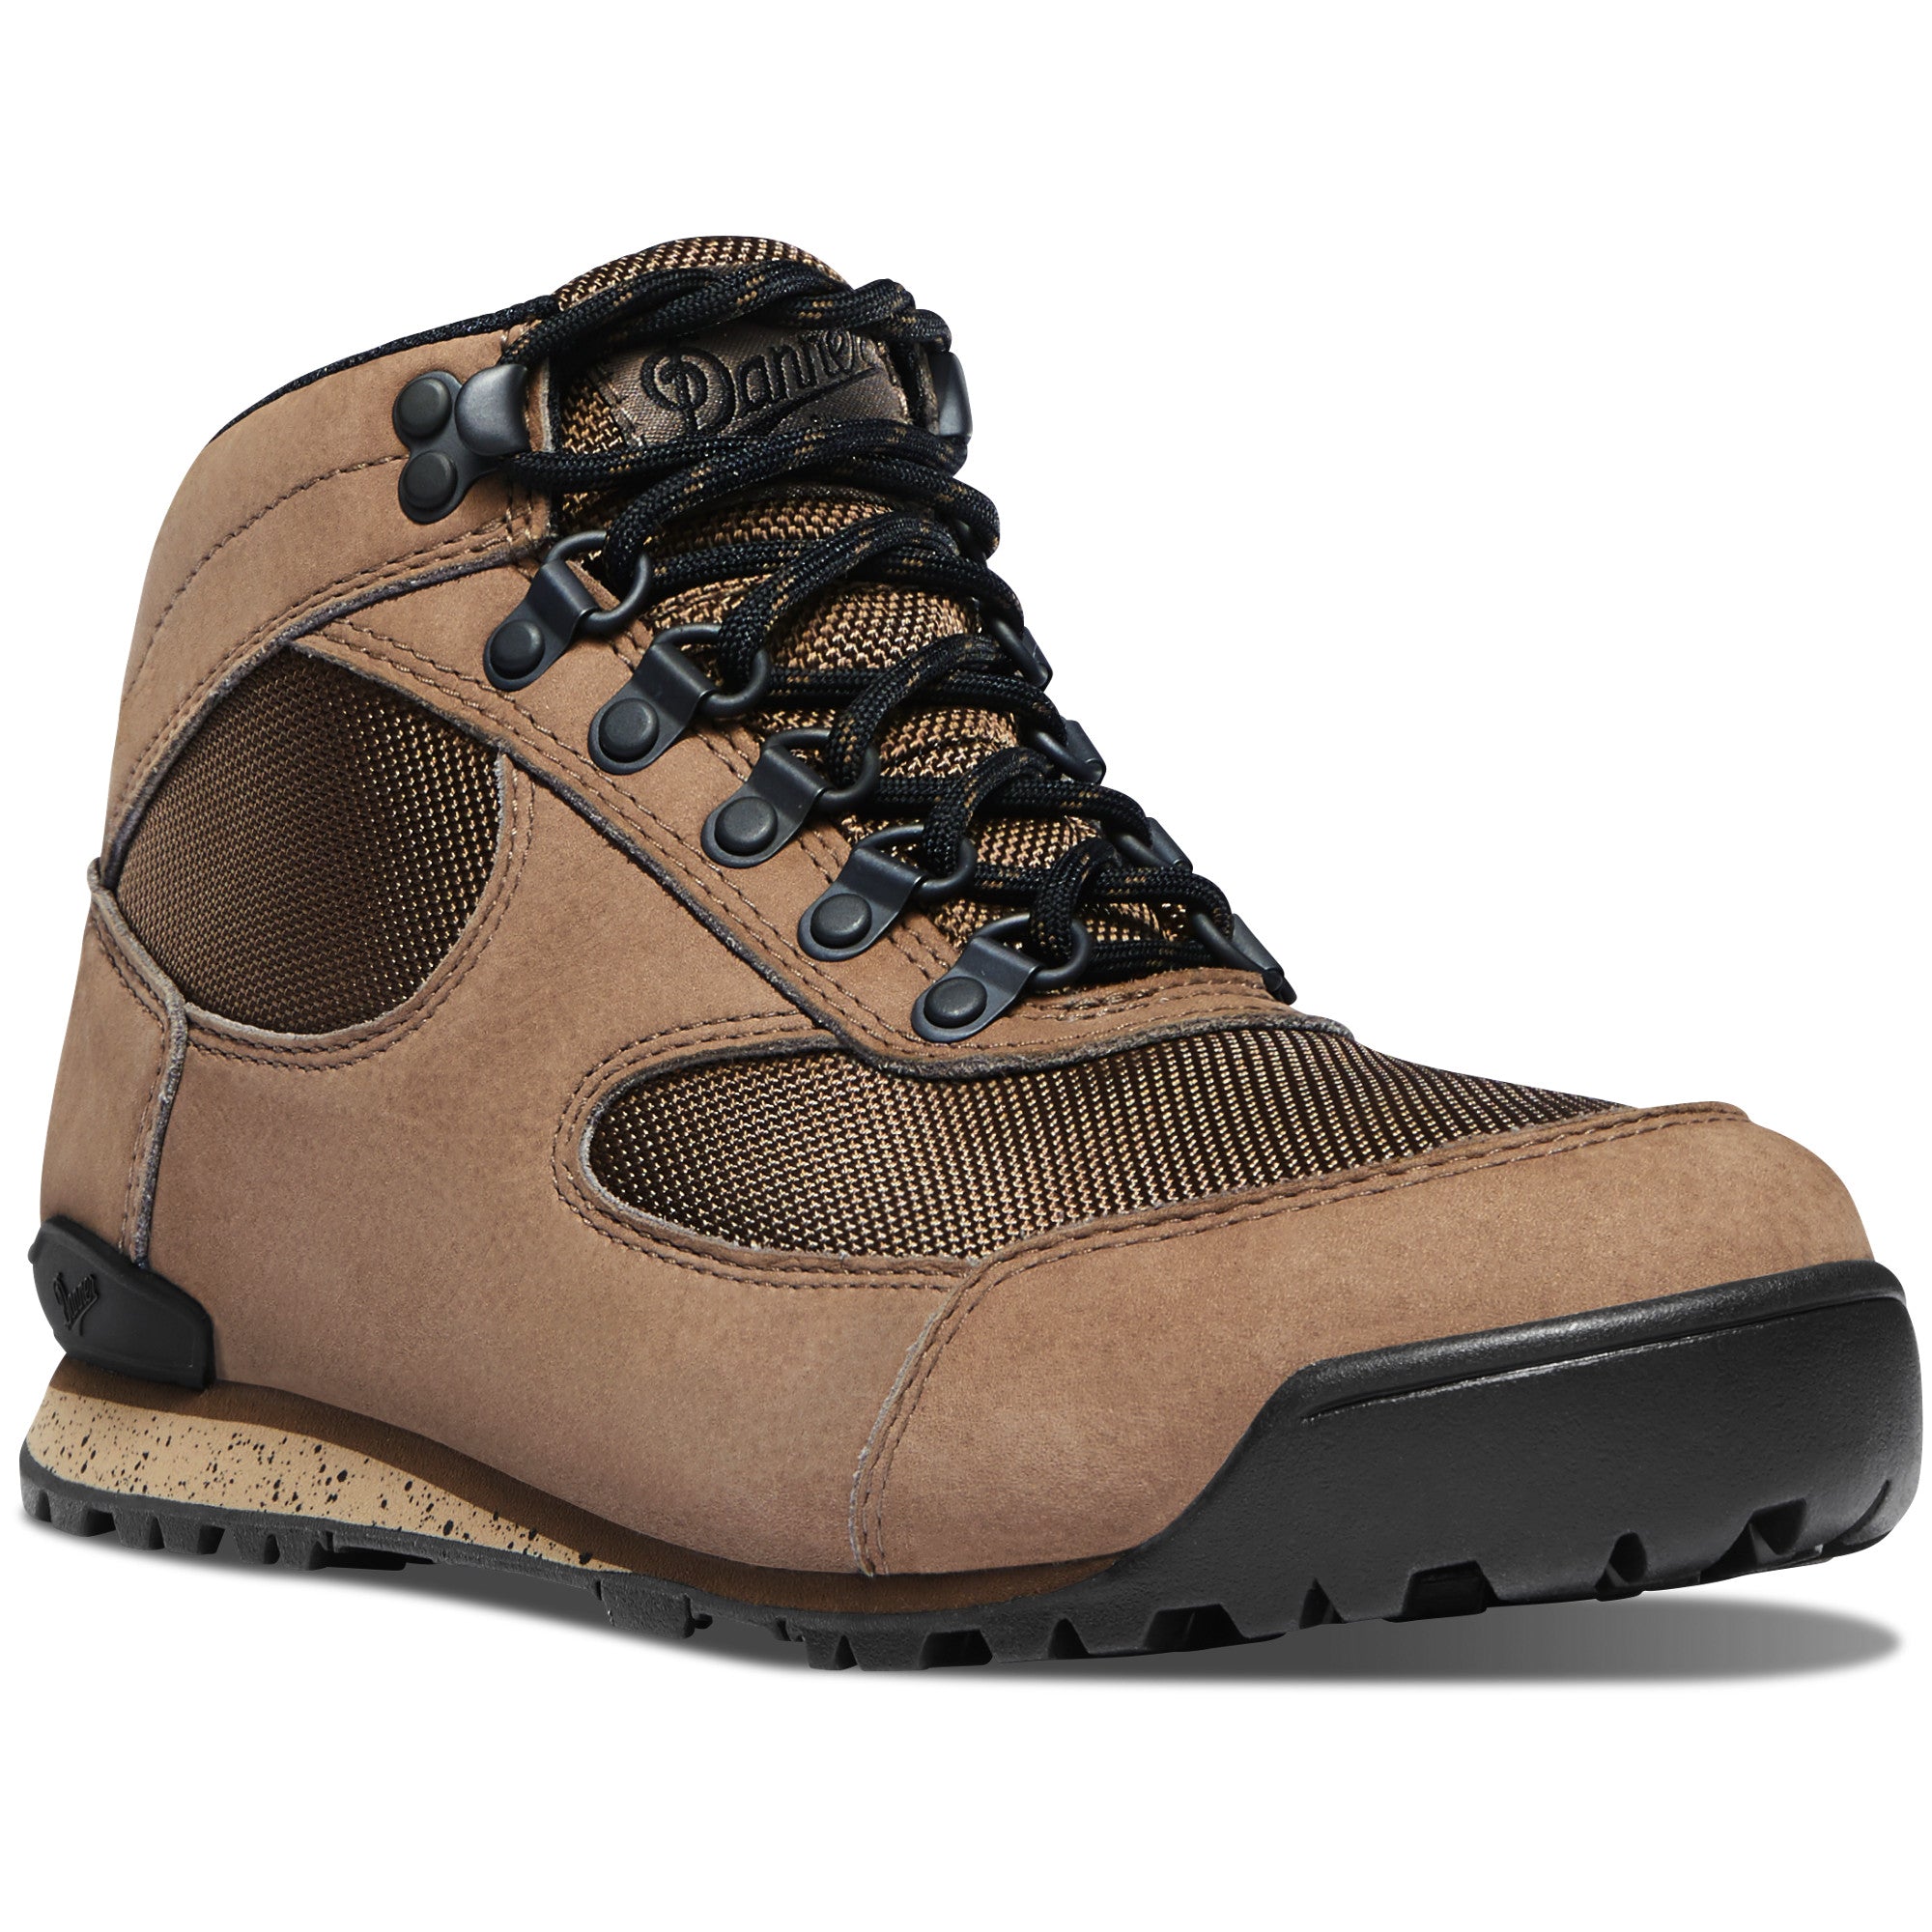 Danner Women's Jag 4.5" Waterproof Hiking Boot in Sandy Taupe from the side